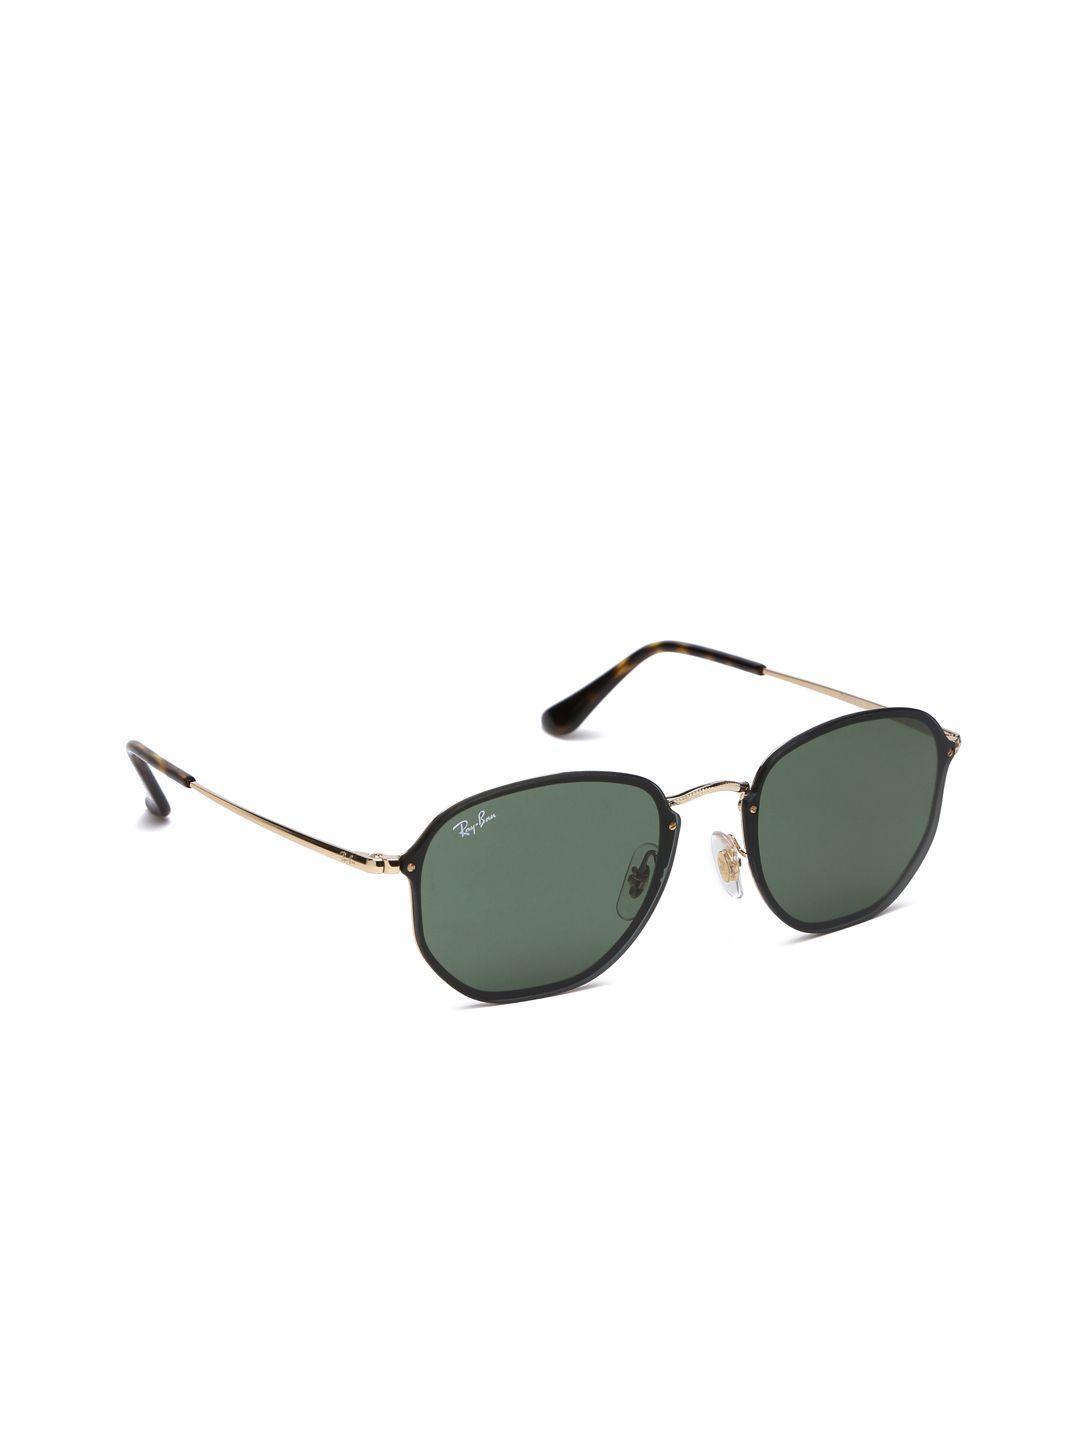 ray-ban unisex round sunglasses 0rb3579n001/7158